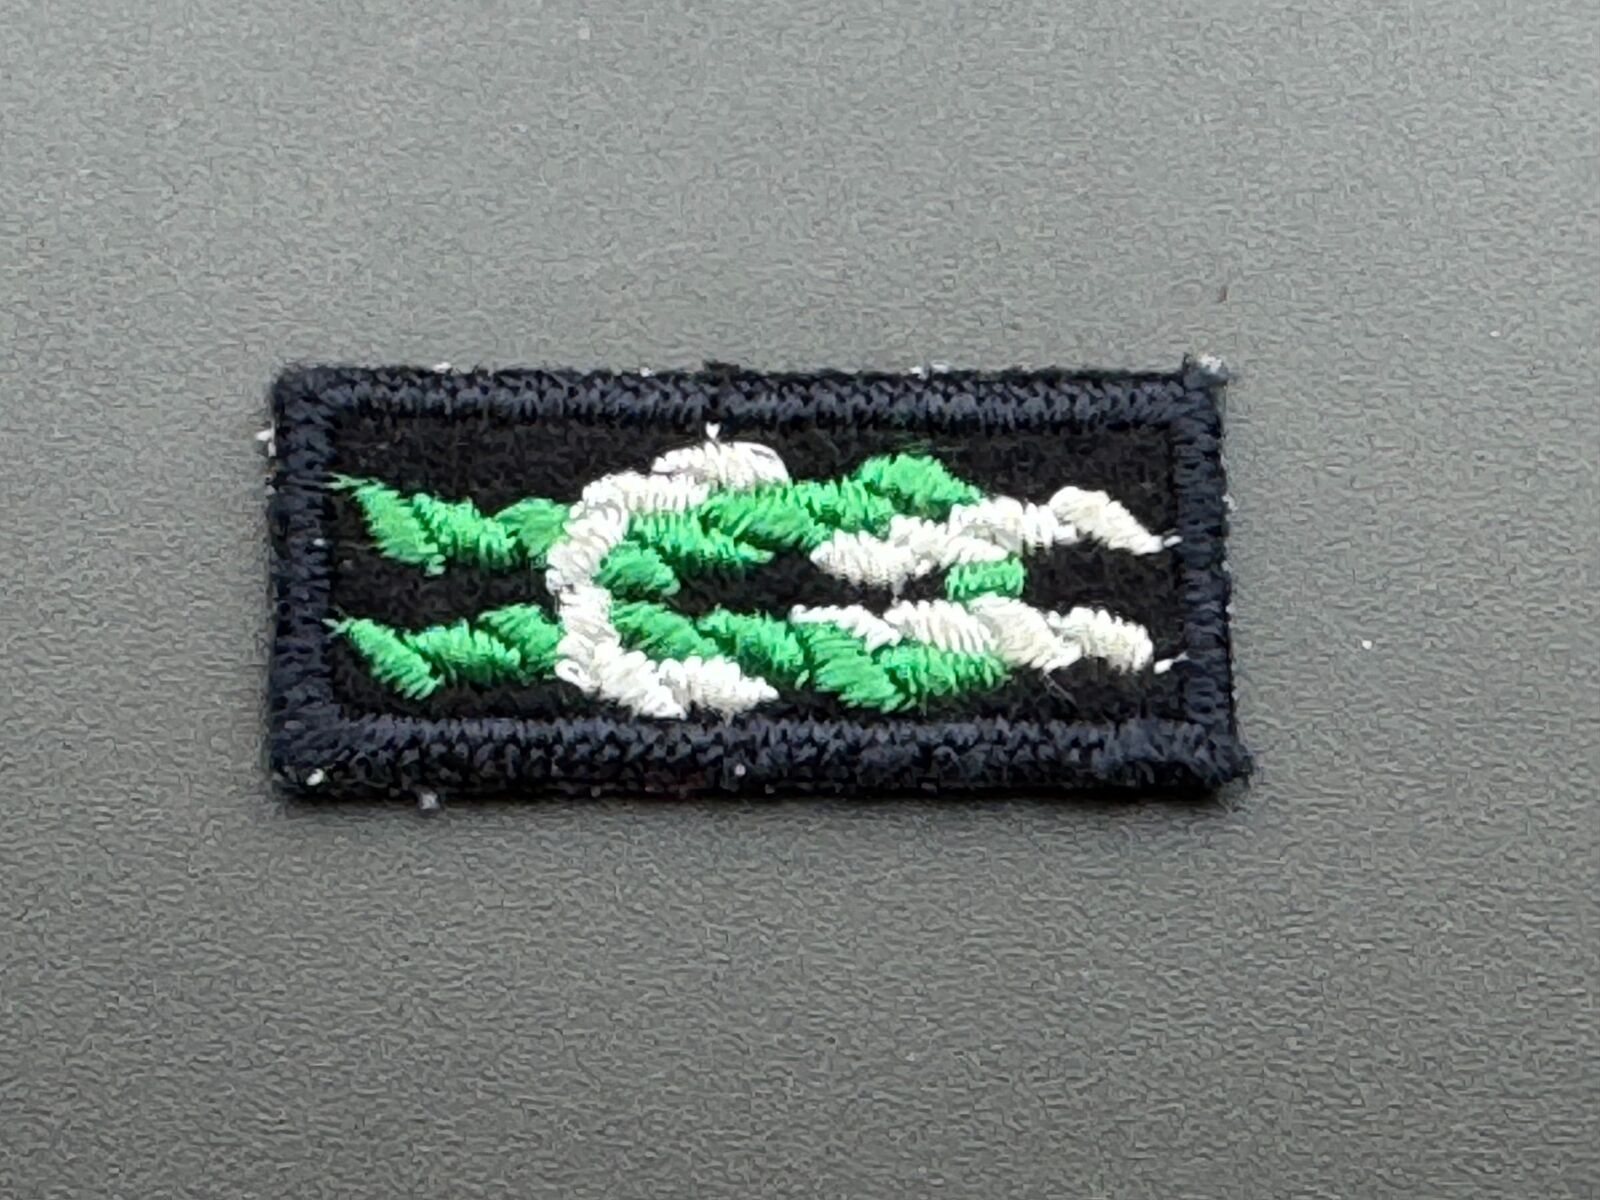 BSA, Sea/Cub Scout Scouter’s Key Award Square Knot Patch, Black Wool (1966-1979)